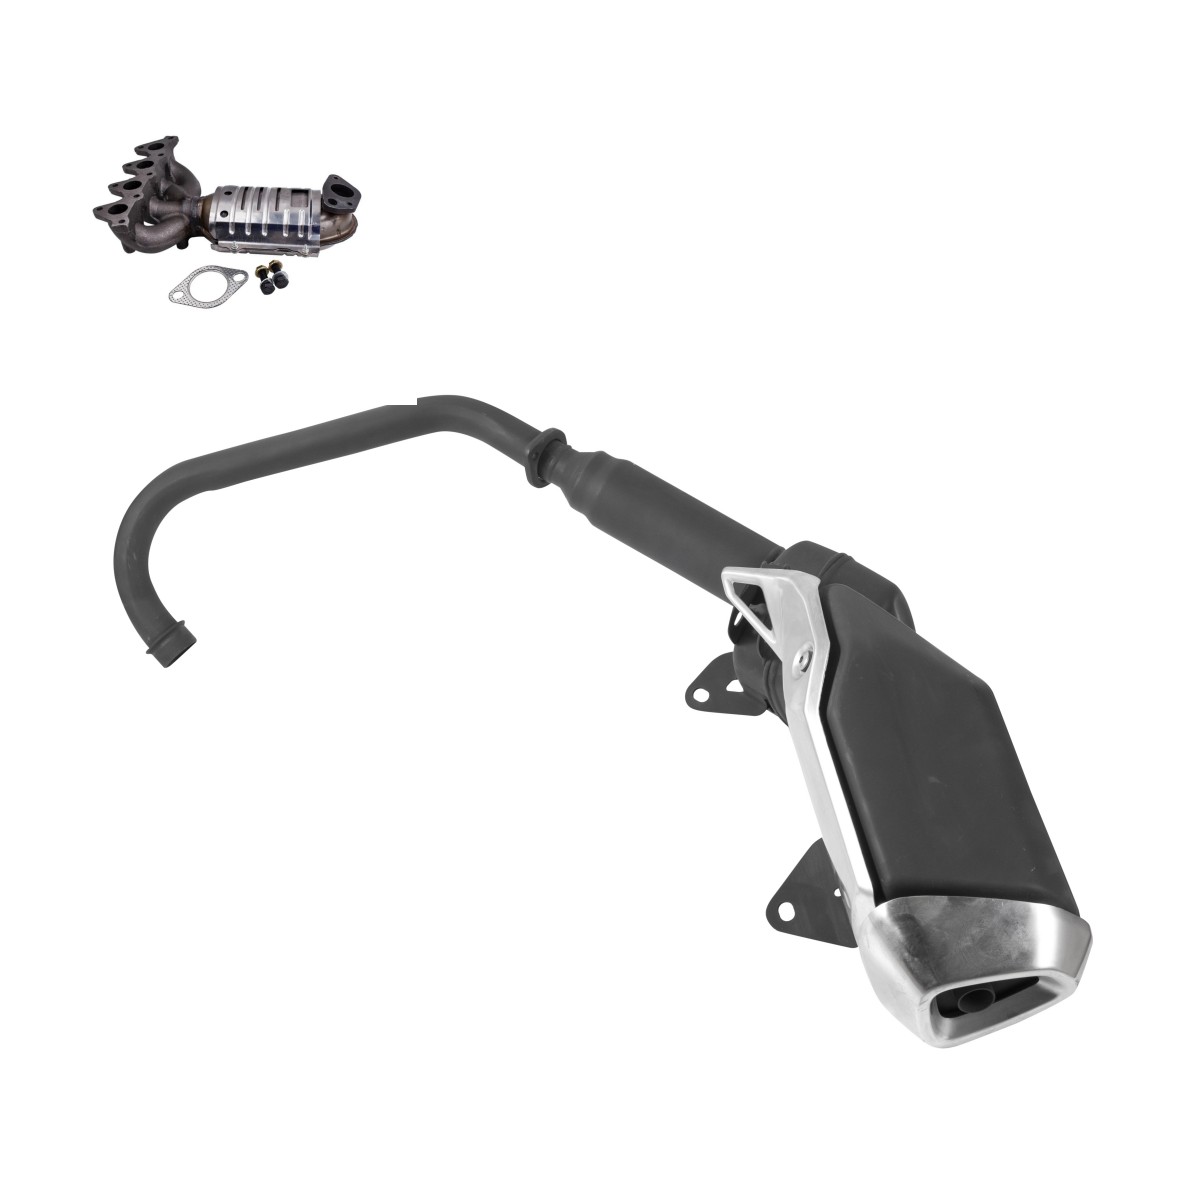 High quality Exhaust Pipe Motorcycle Professional Universal Exhaust Muffler